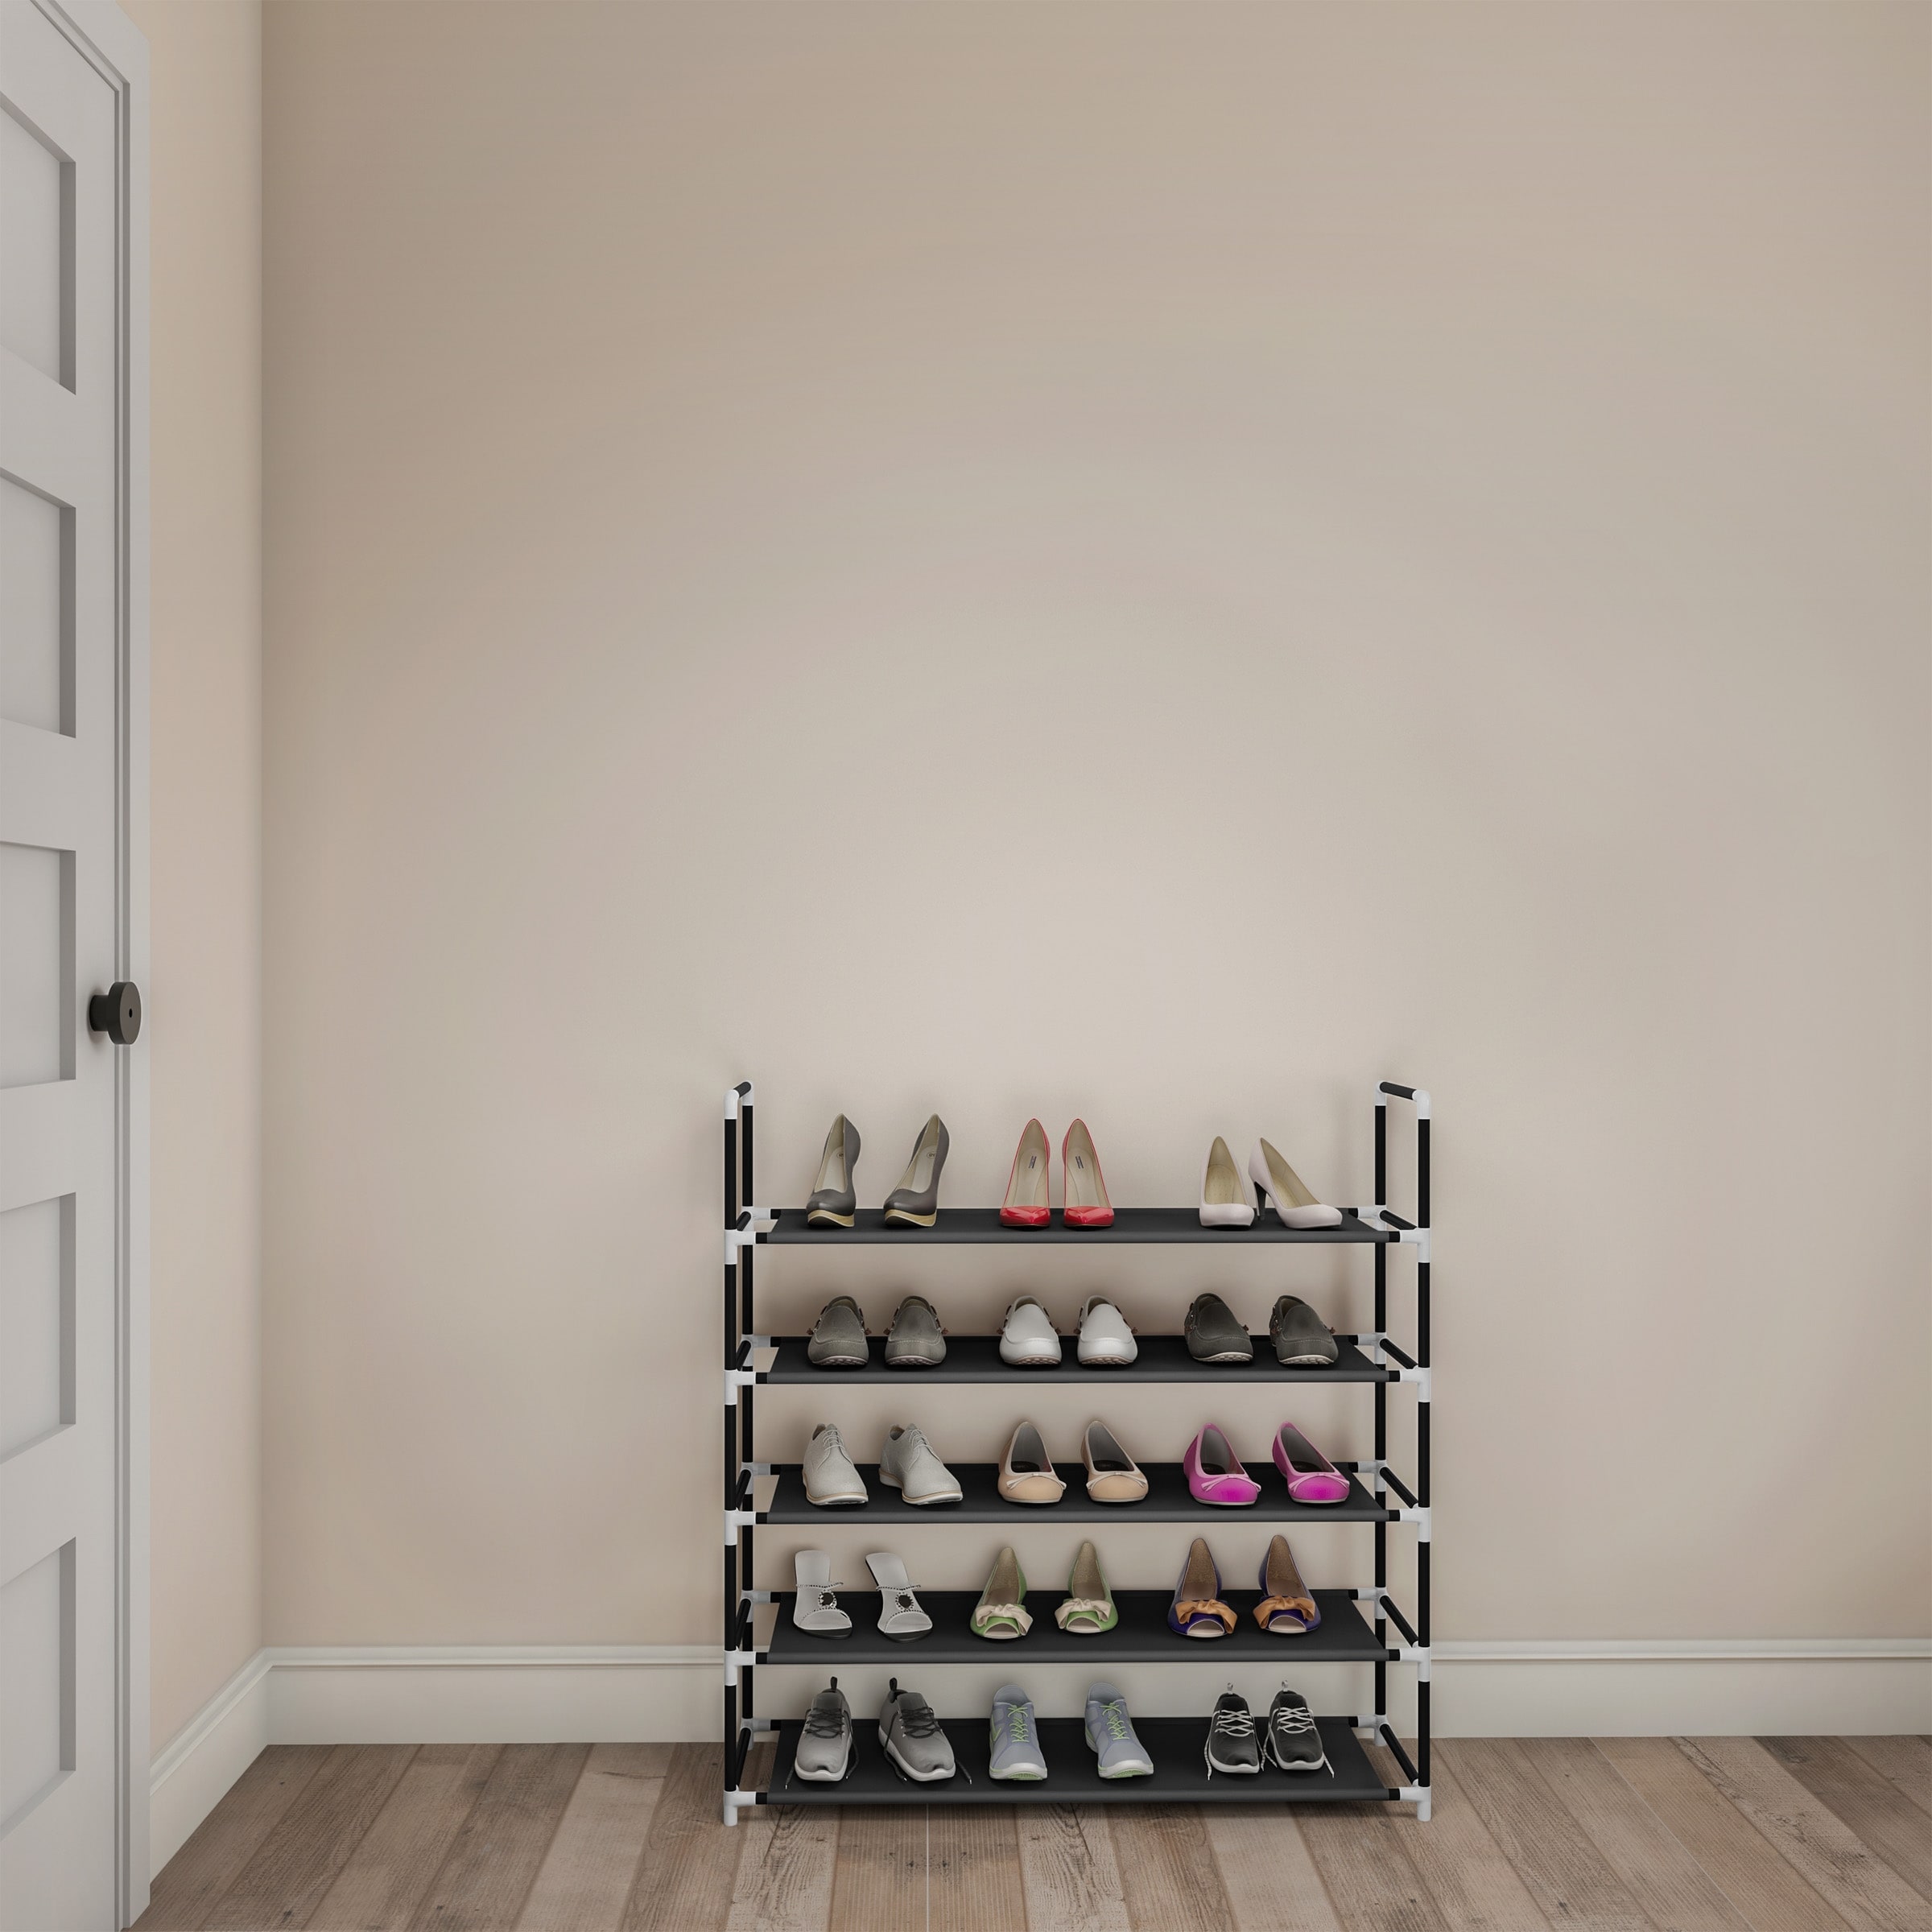 https://ak1.ostkcdn.com/images/products/is/images/direct/3fc49e0b3af1aceaa324462563970aa076be4041/Shoe-Rack--Tiered-Storage-for-Sneakers%2C-Heels%2C-Flats%2C-Accessories%2C-and-More-Space-Saving-Organization-by-Lavish-Home.jpg